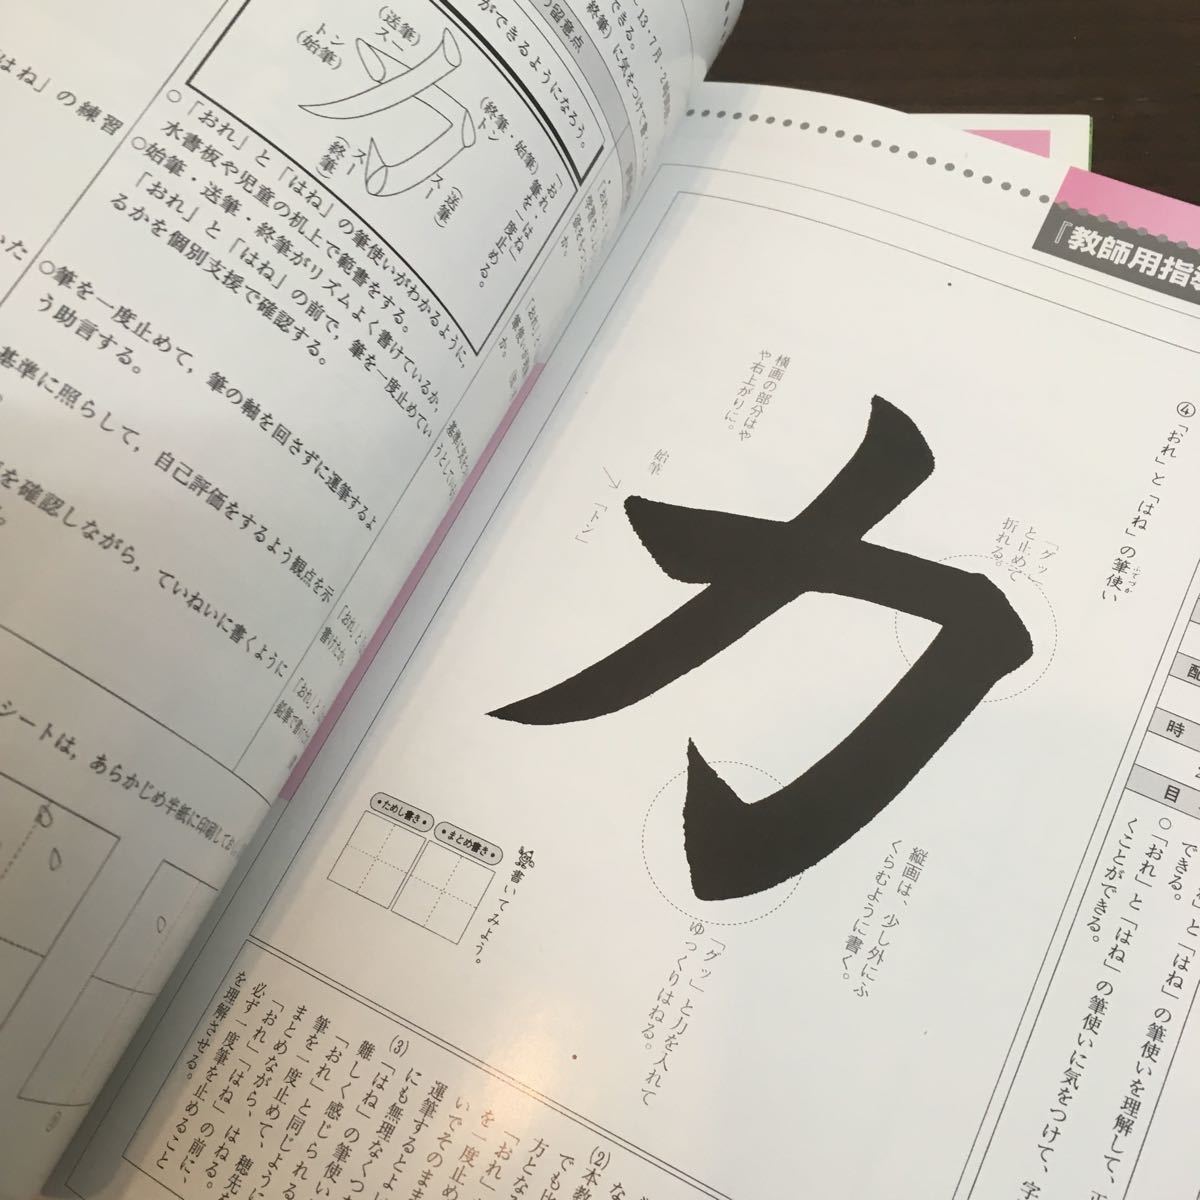  Heisei era 17 fiscal year elementary school for elementary school paper .1~6 year / education publish / contents explanation materials attaching [3K]